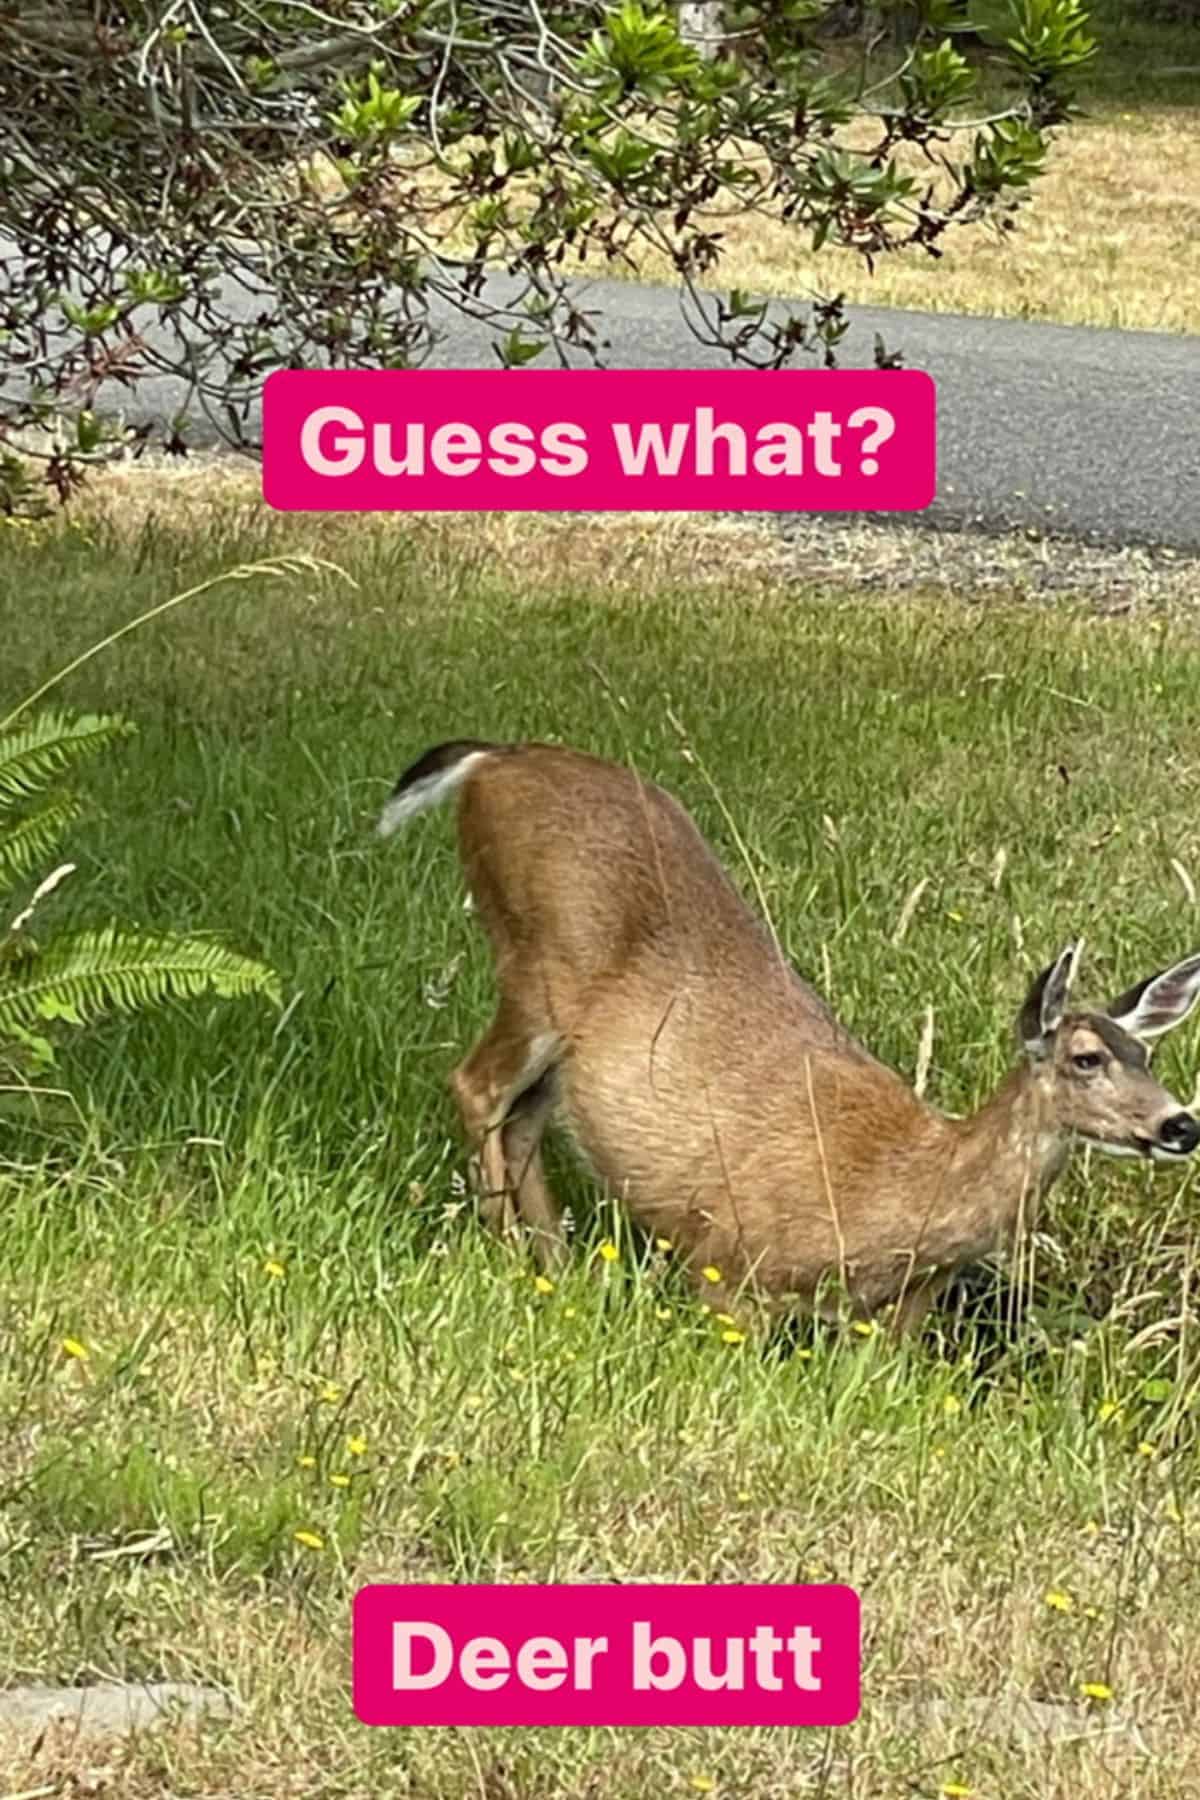 a deer in a ditch with its butt up.